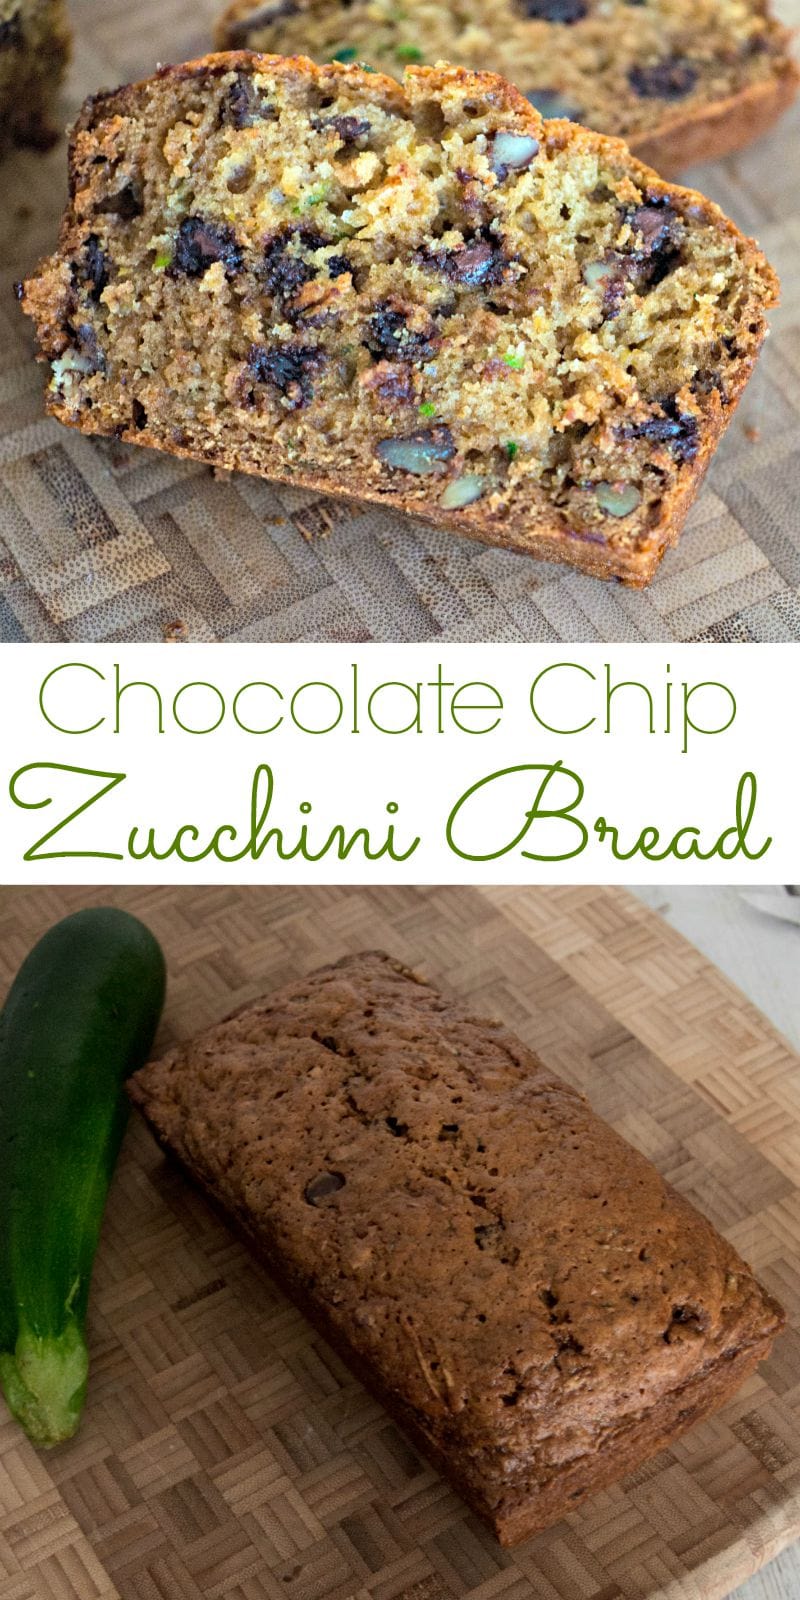 Zucchini bread with chocolate chips.